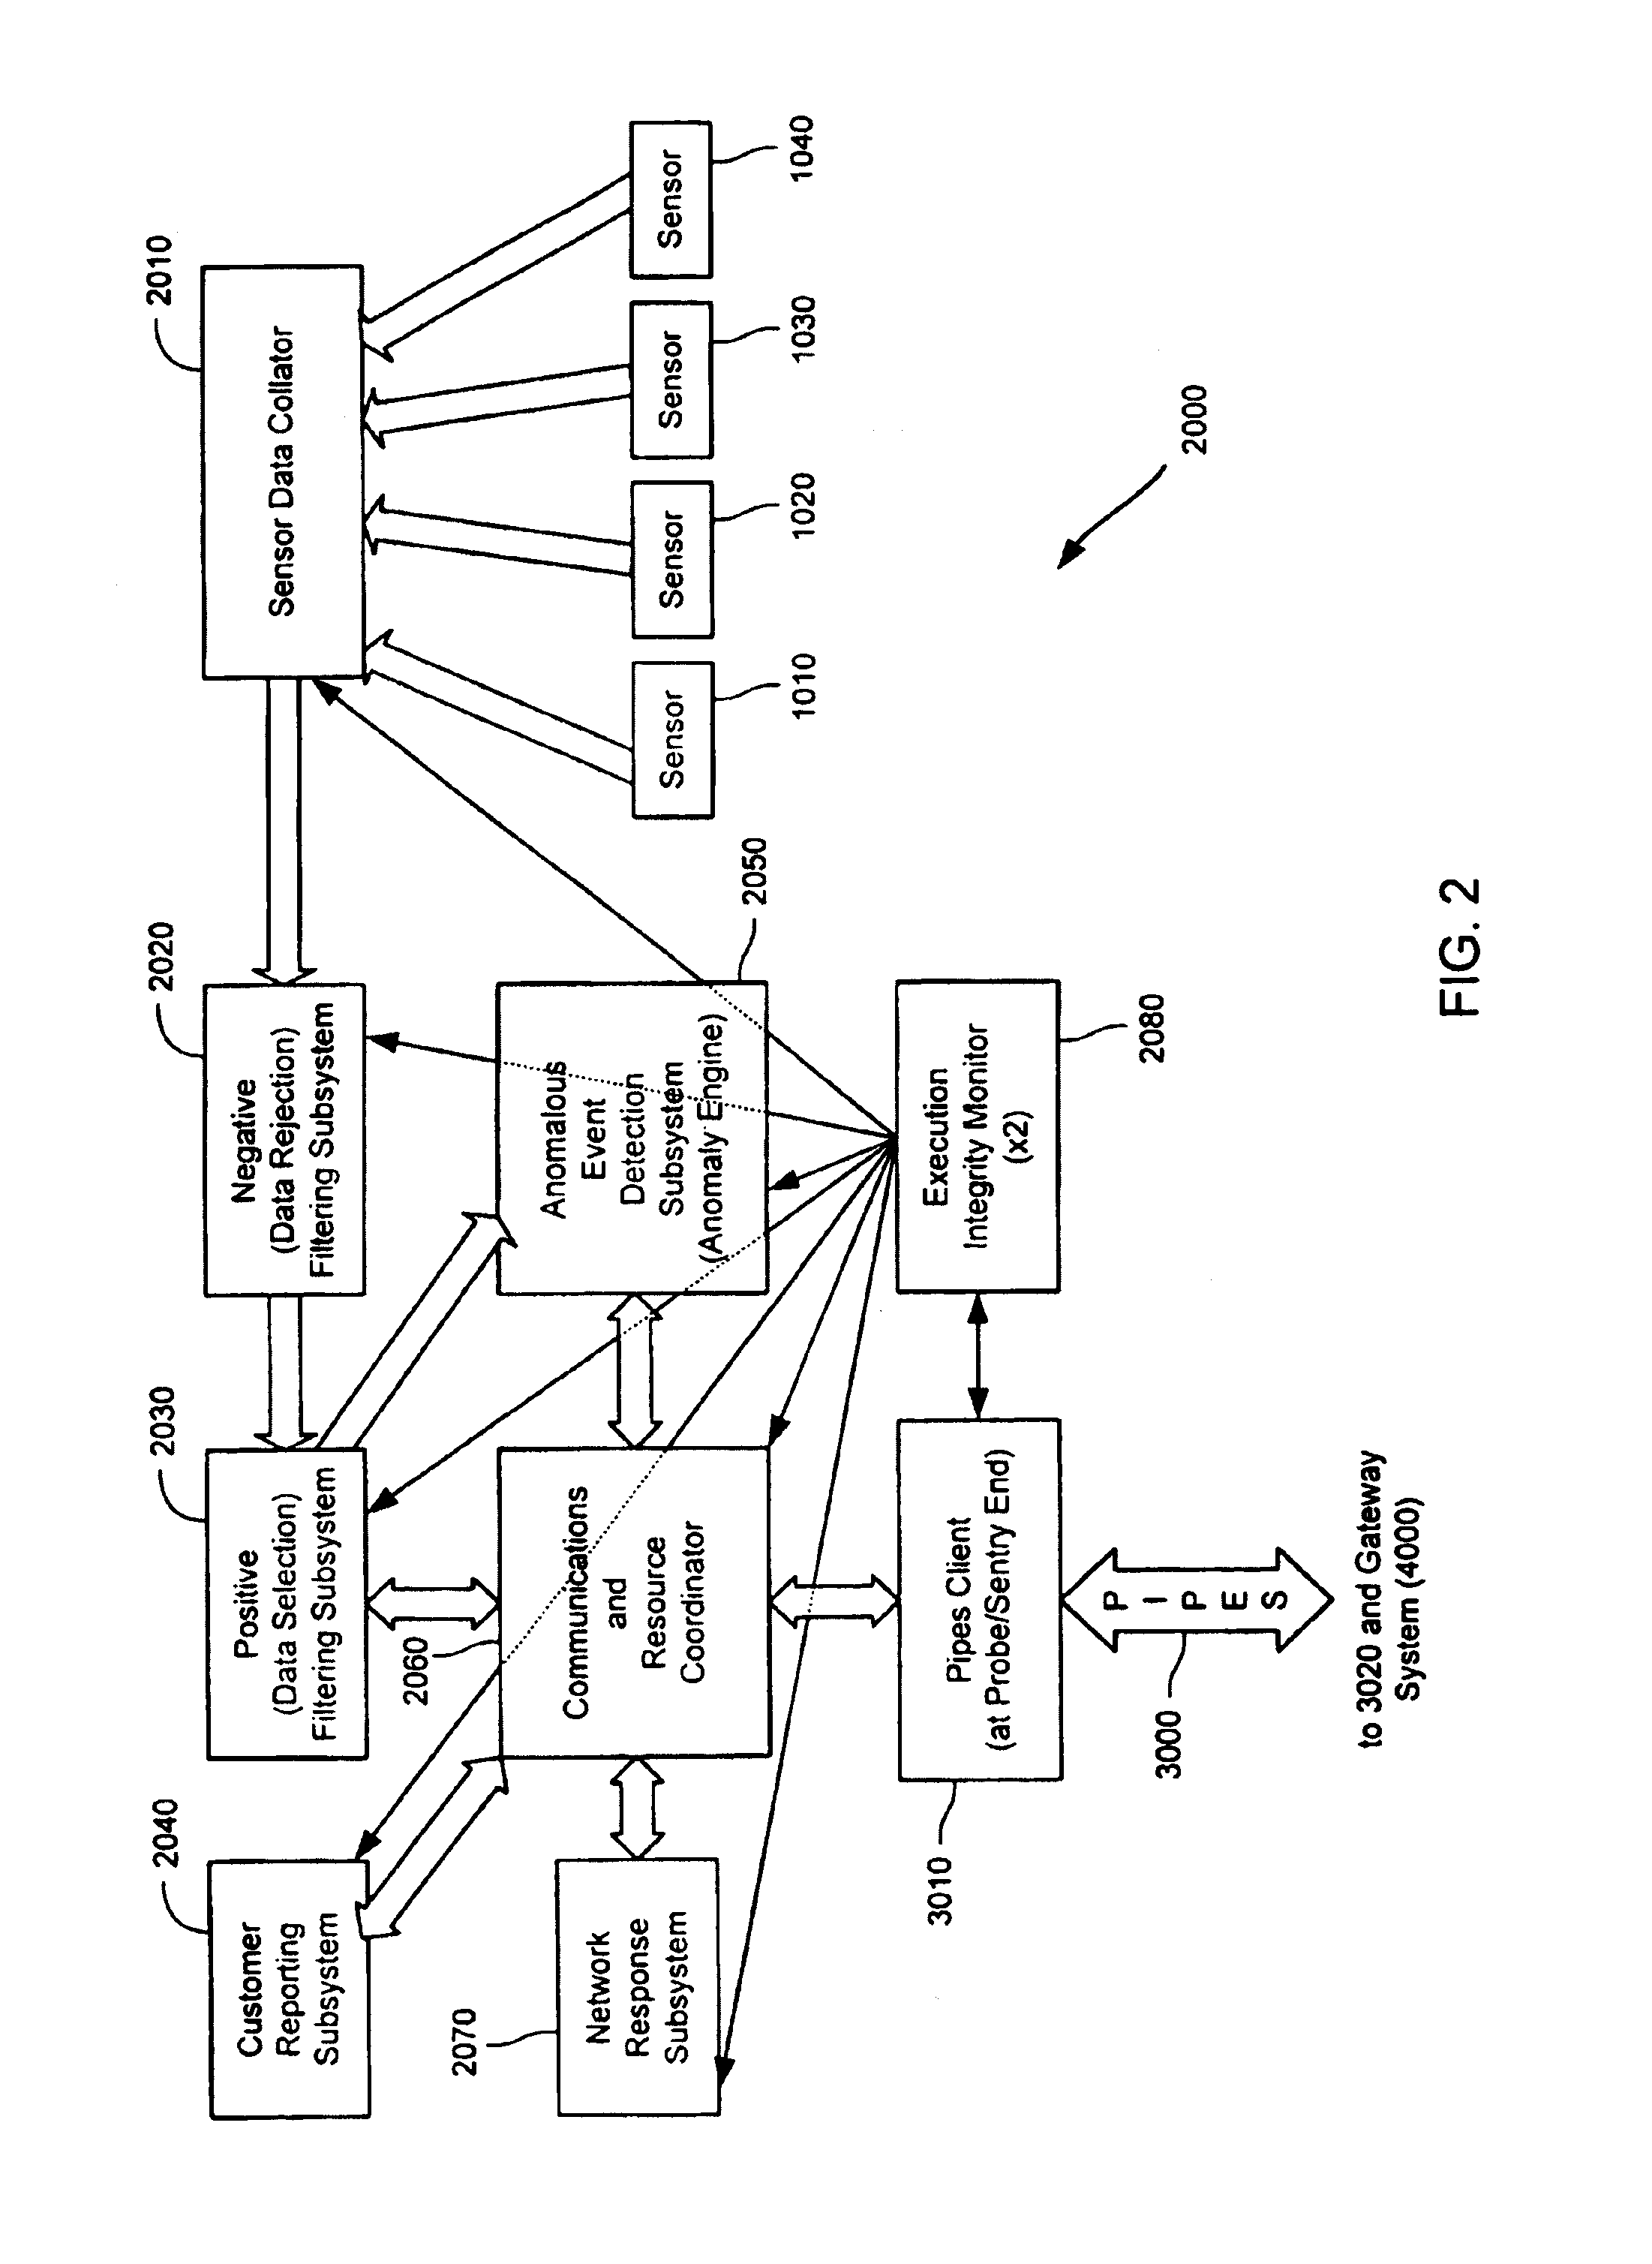 Method and system for dynamic network intrusion monitoring, detection and response